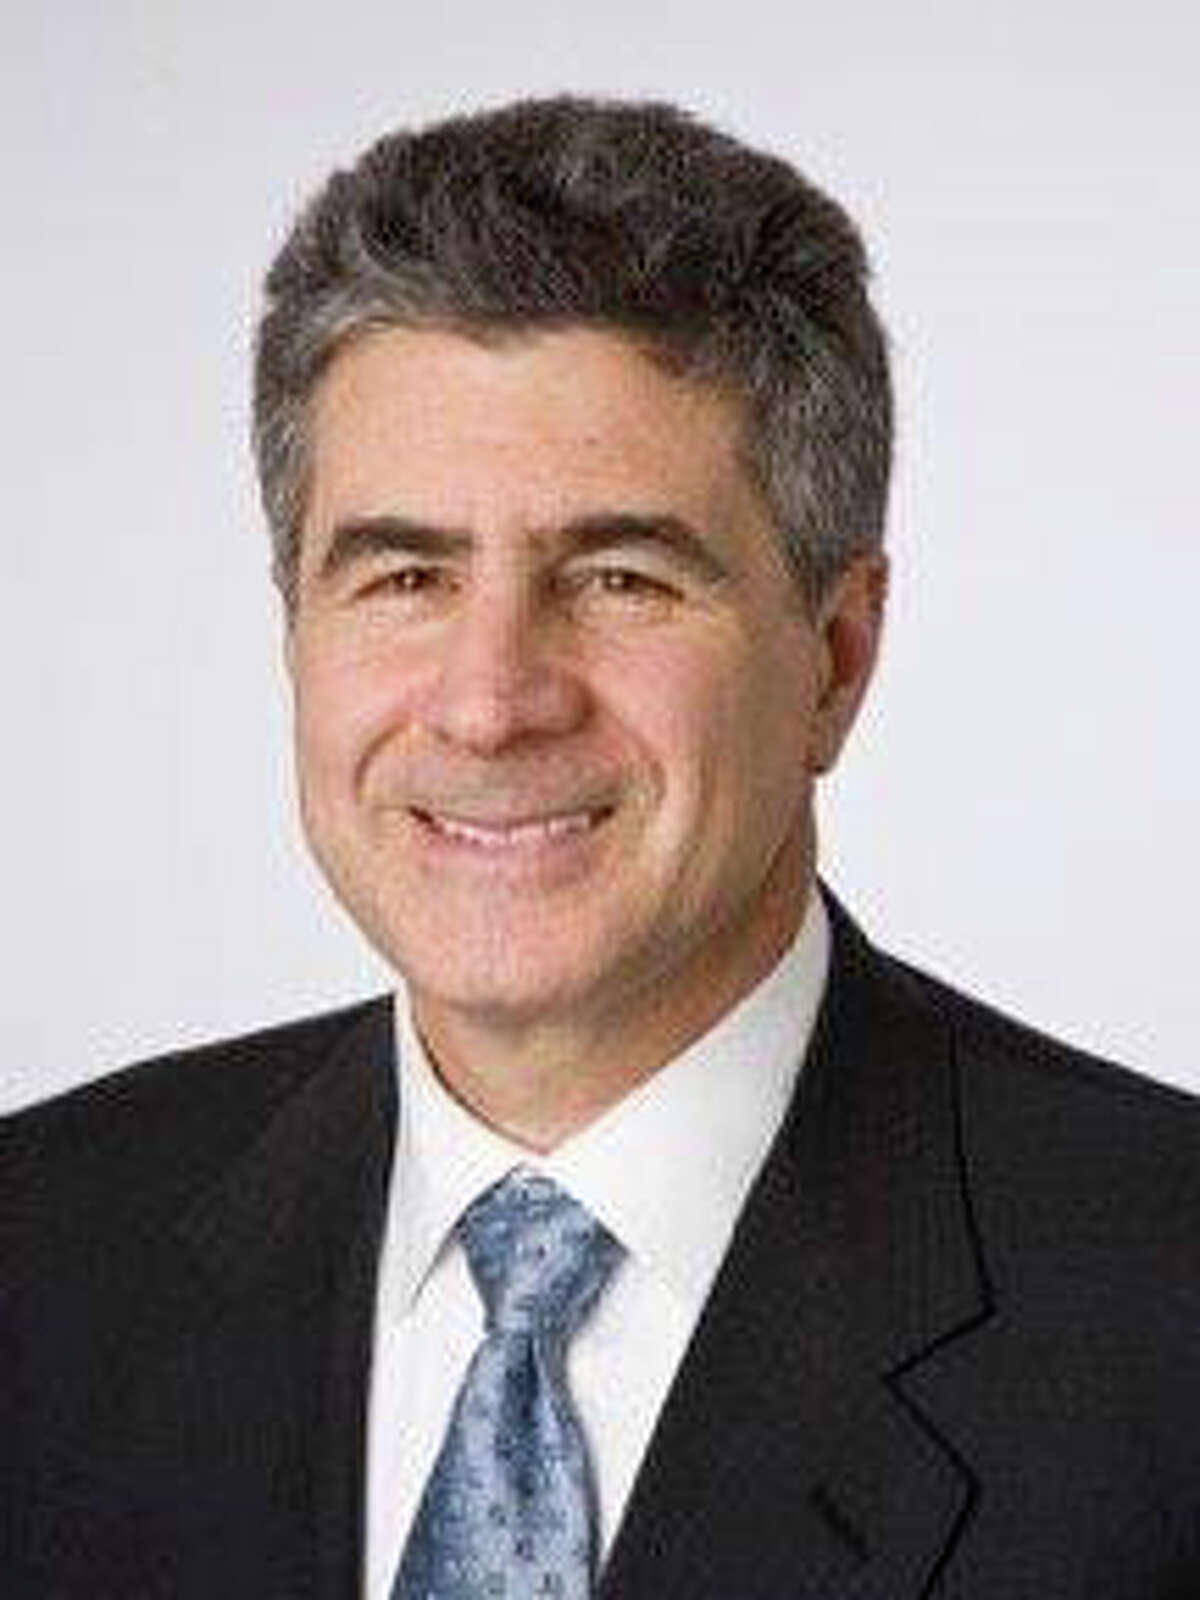 Laurence Kantor, advanced leadership fellow at Harvard University and former managing director and global head of research at Barclays, will speak on "Global Economic and Market Outlook" at Wednesday's meeting of the Retired Men's Association of Greenwich. He'll speak about the major economies (US, China, Europe) and where the financial markets are heading, what has driven the turbulent prior year and what might the future hold, stocks and interest rates, oil prices and the dollar, The Fed and the possibility of negative interest rates. Meetings are at the First Presbyterian Church, Lafayette Avenue. Doors open at 10:40 a.m.